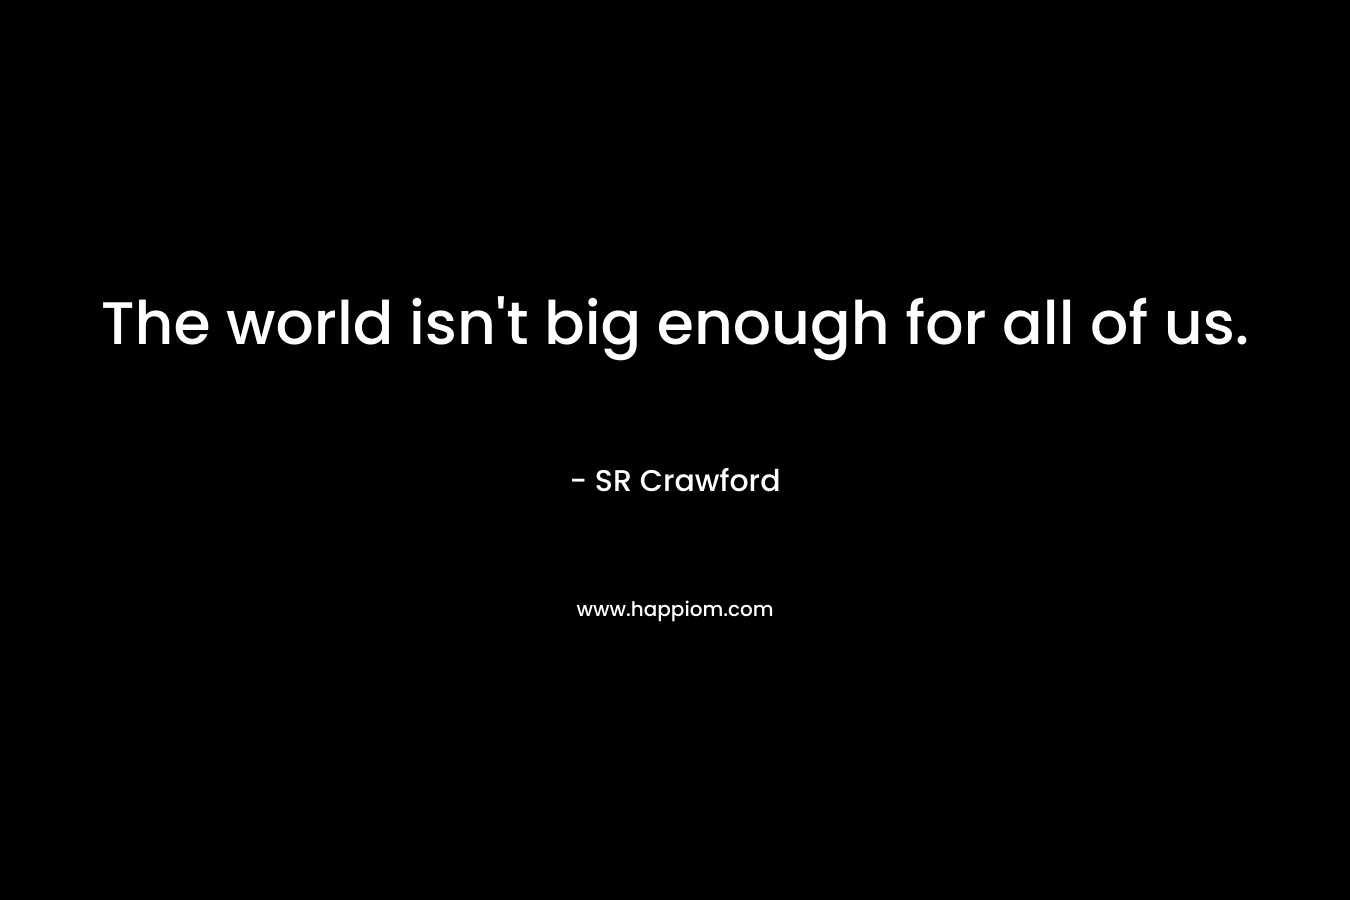 The world isn't big enough for all of us.